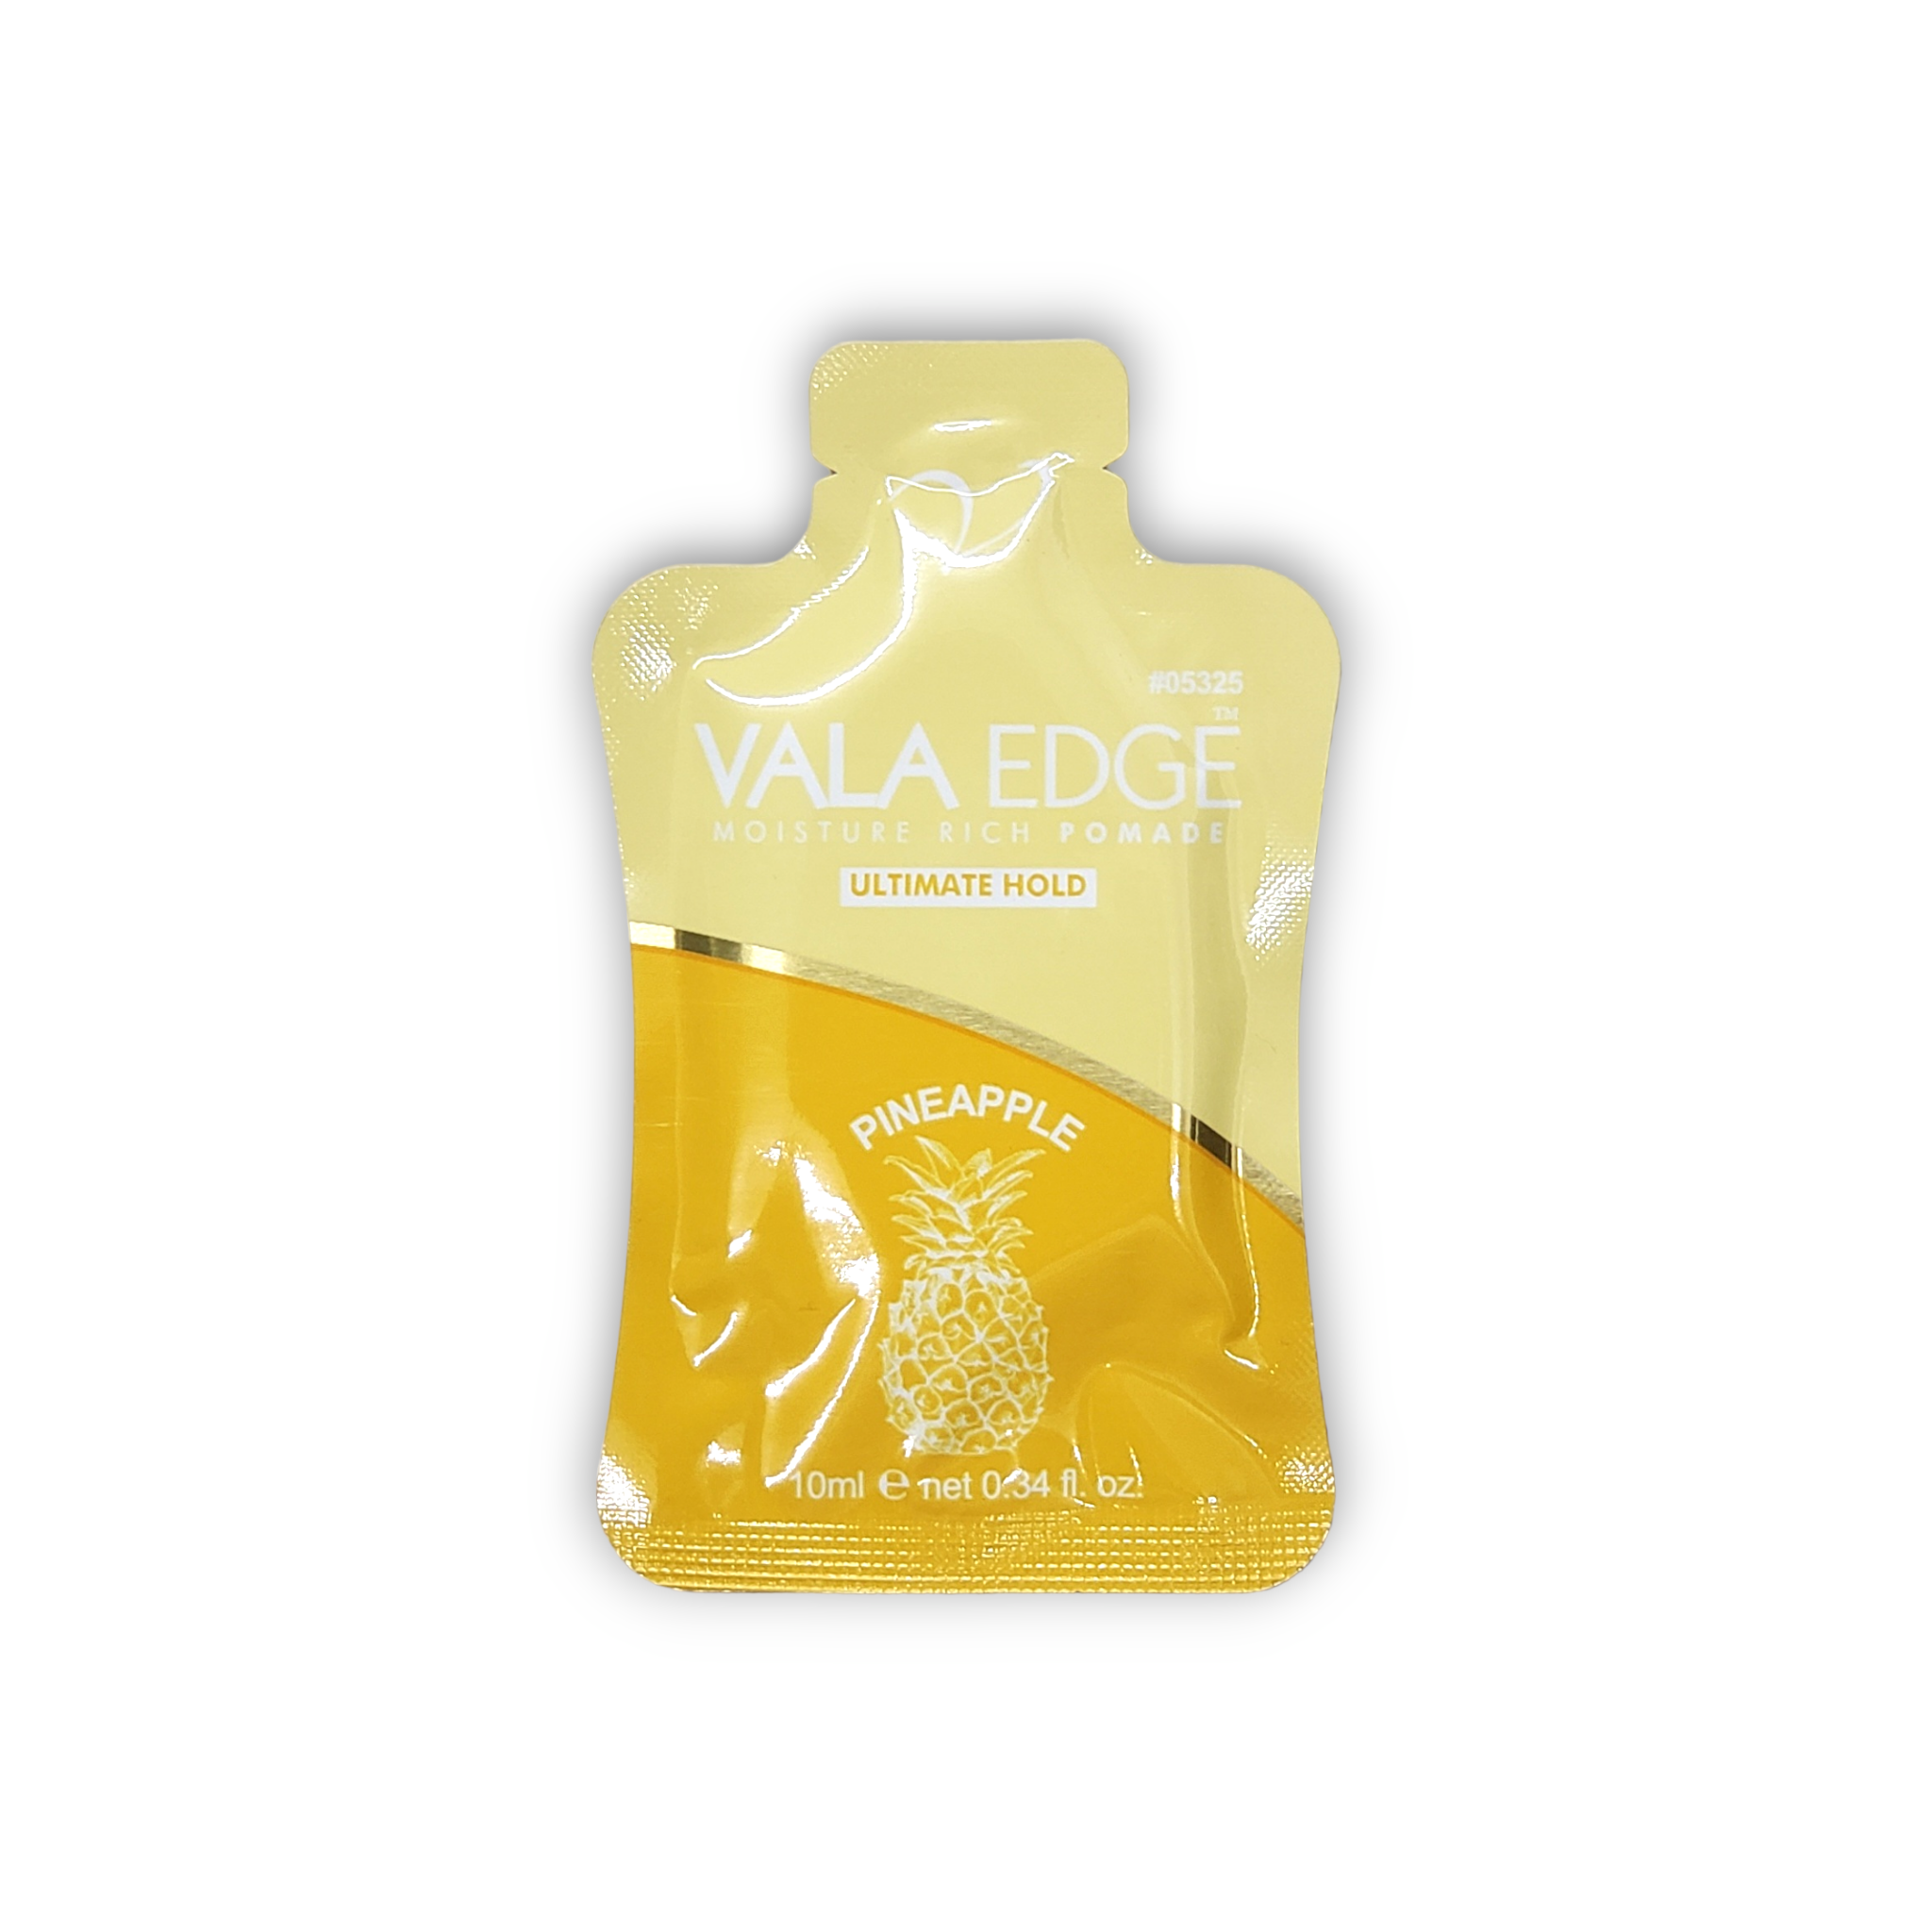 Vala Edge Moisture Rich Pomade Packet (Ultimate Hold)